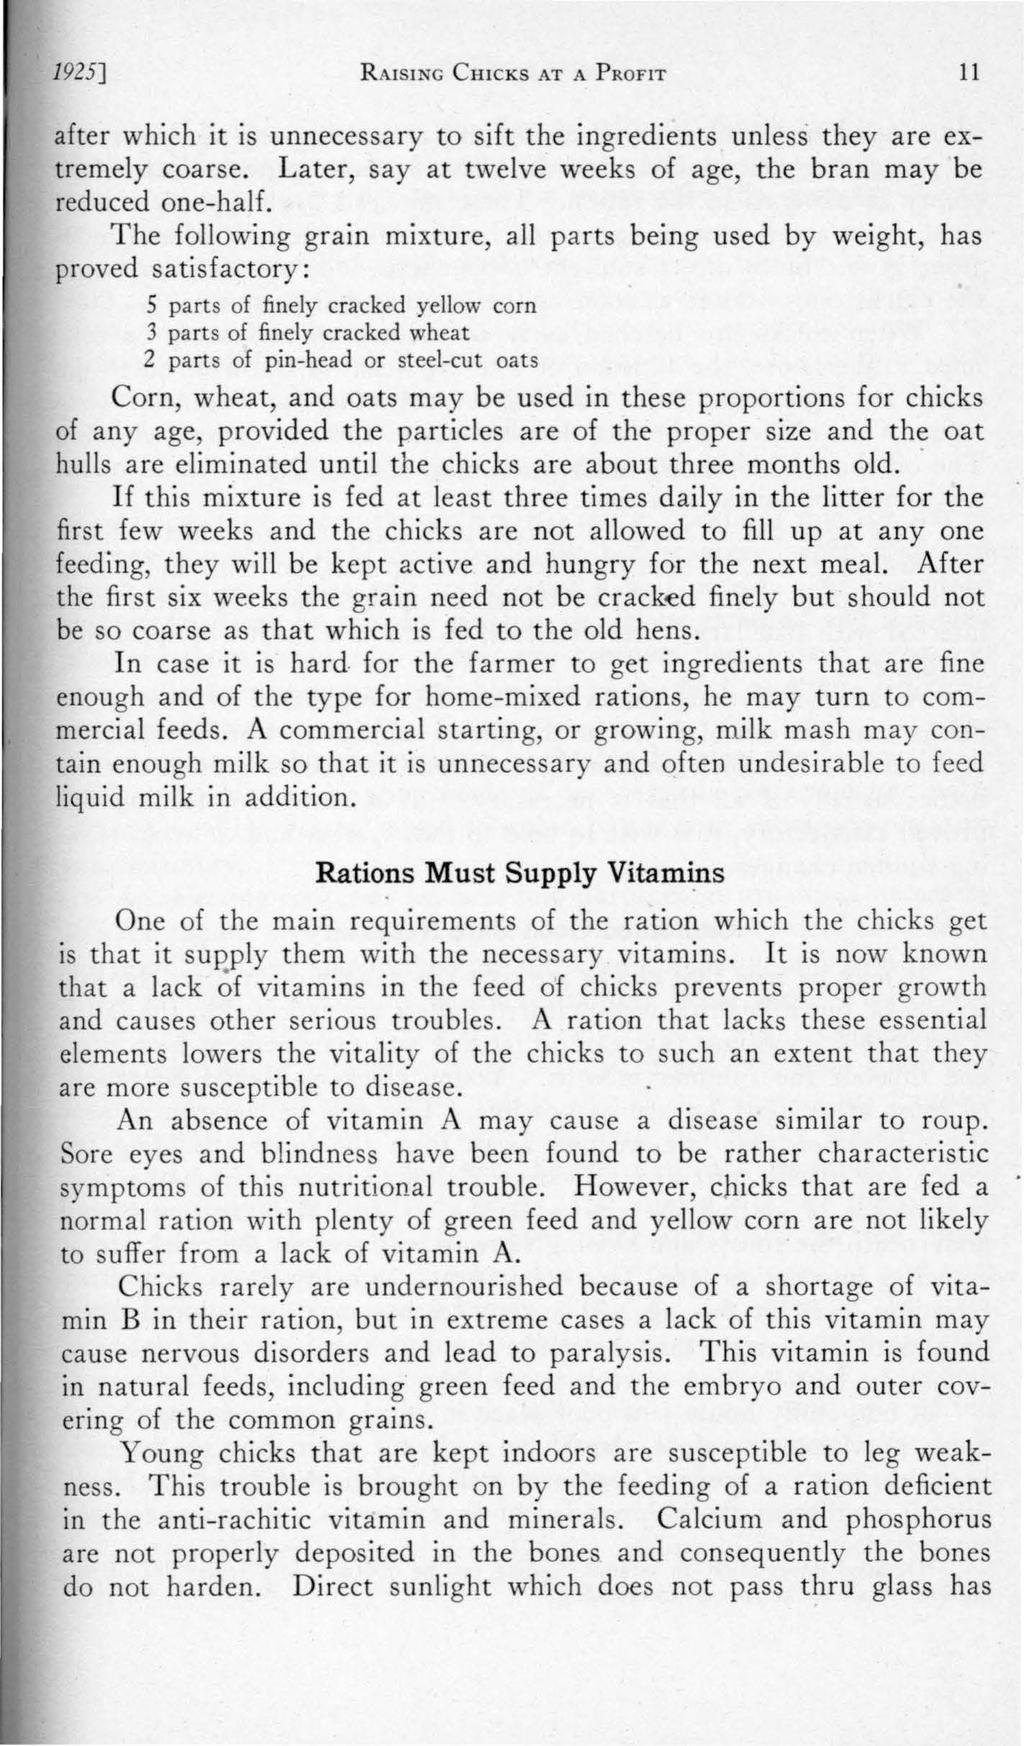 1925] RAISING CHICKS AT A PROFIT 11 after which it is unnecessary to sift the ingredients unless they are extremely coarse. Later, say at twelve weeks of age, the bran may be reduced one-half.